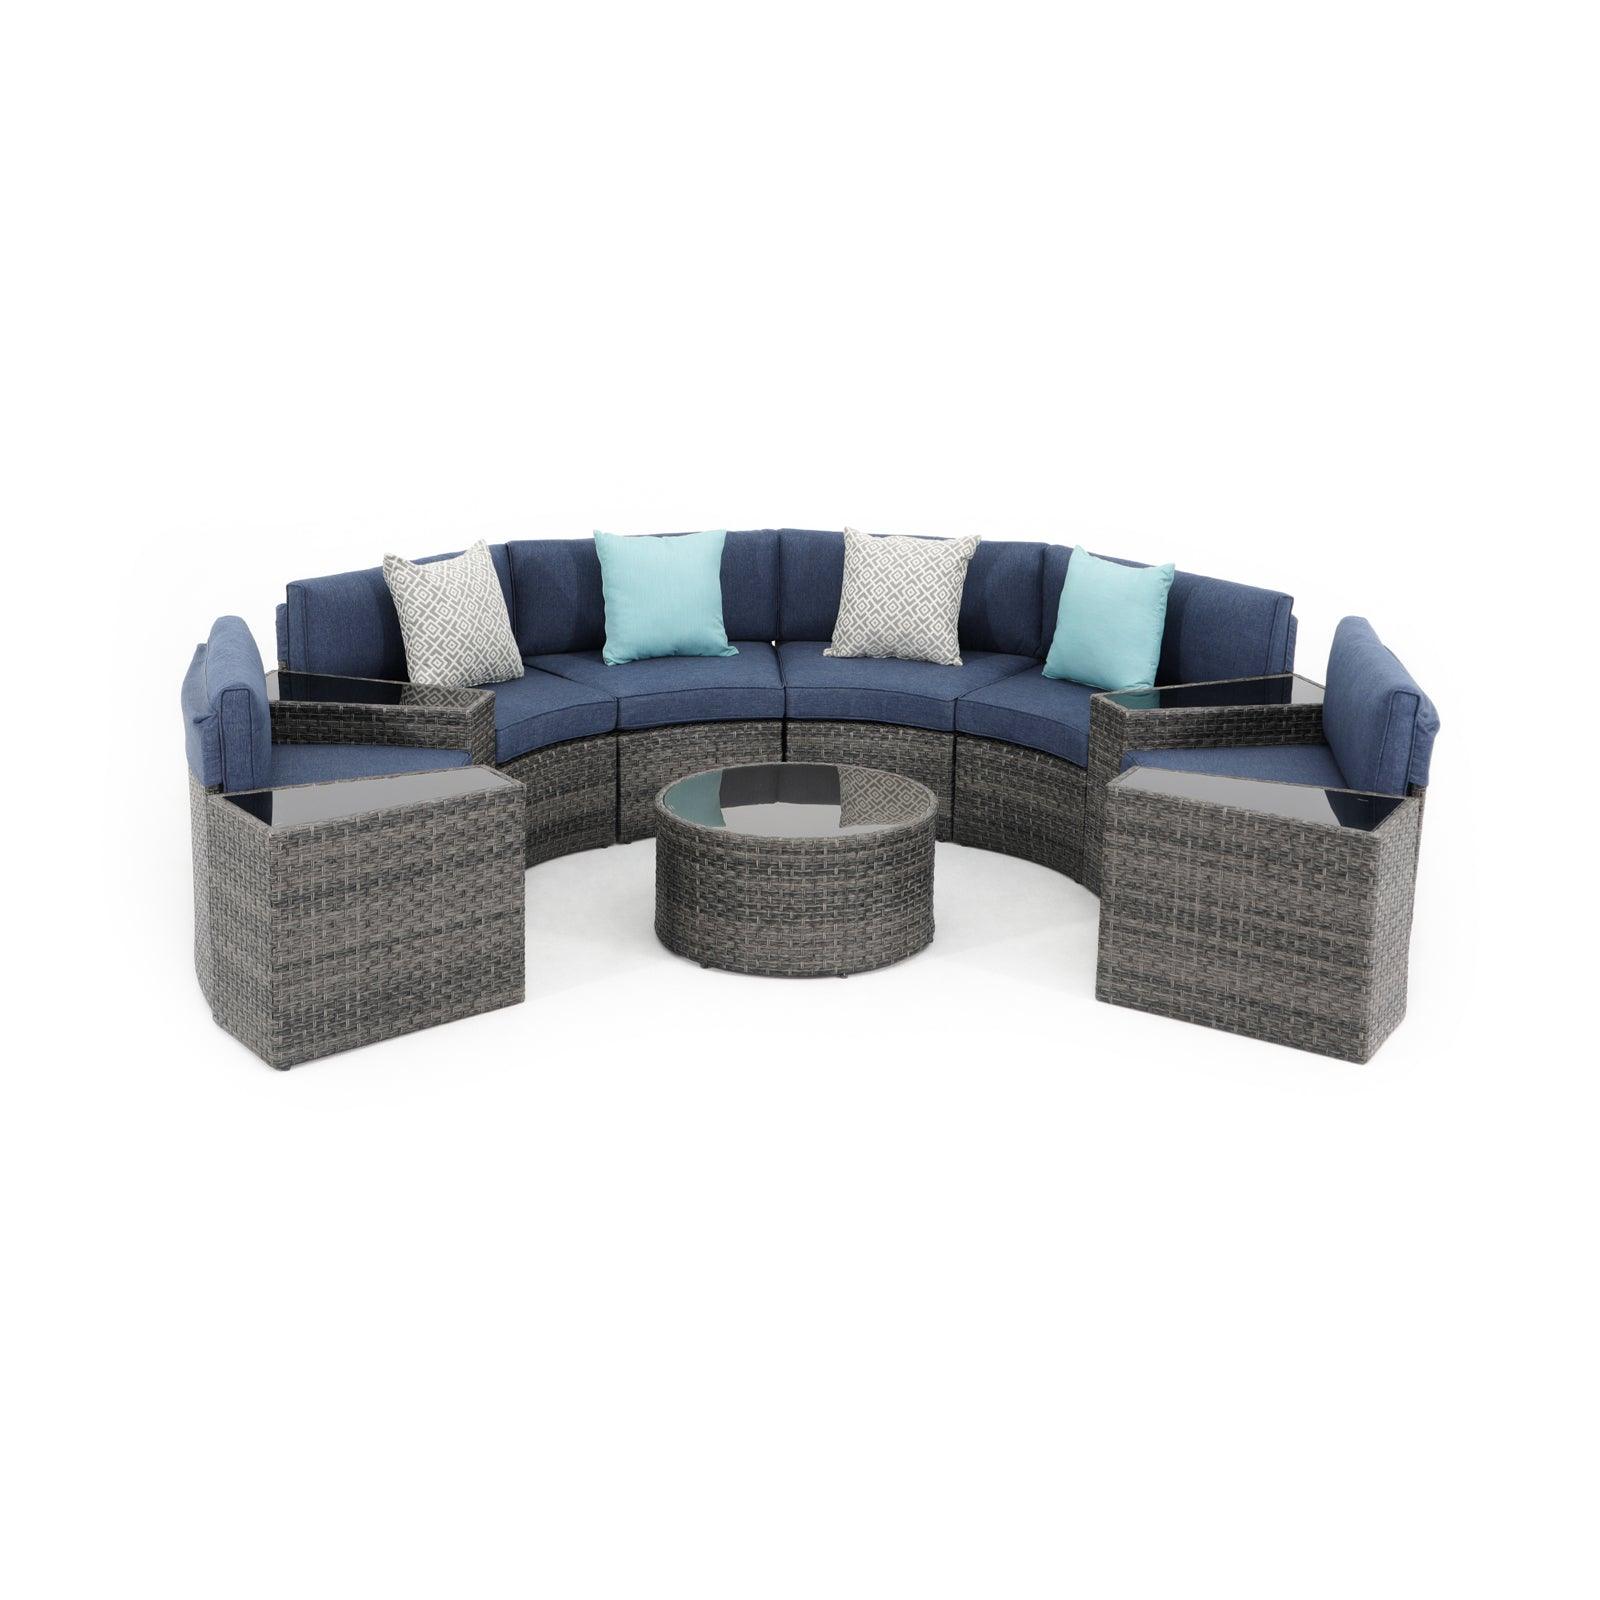 Boboli 11-piece Grey Wicker Curved Sectional Set with navy blue cushions, 1 Round Glass Table + 4 glass top side tables + 6 sectional sofas, front- Jardina Furniture #color_Navy Blue #piece_11-pc.